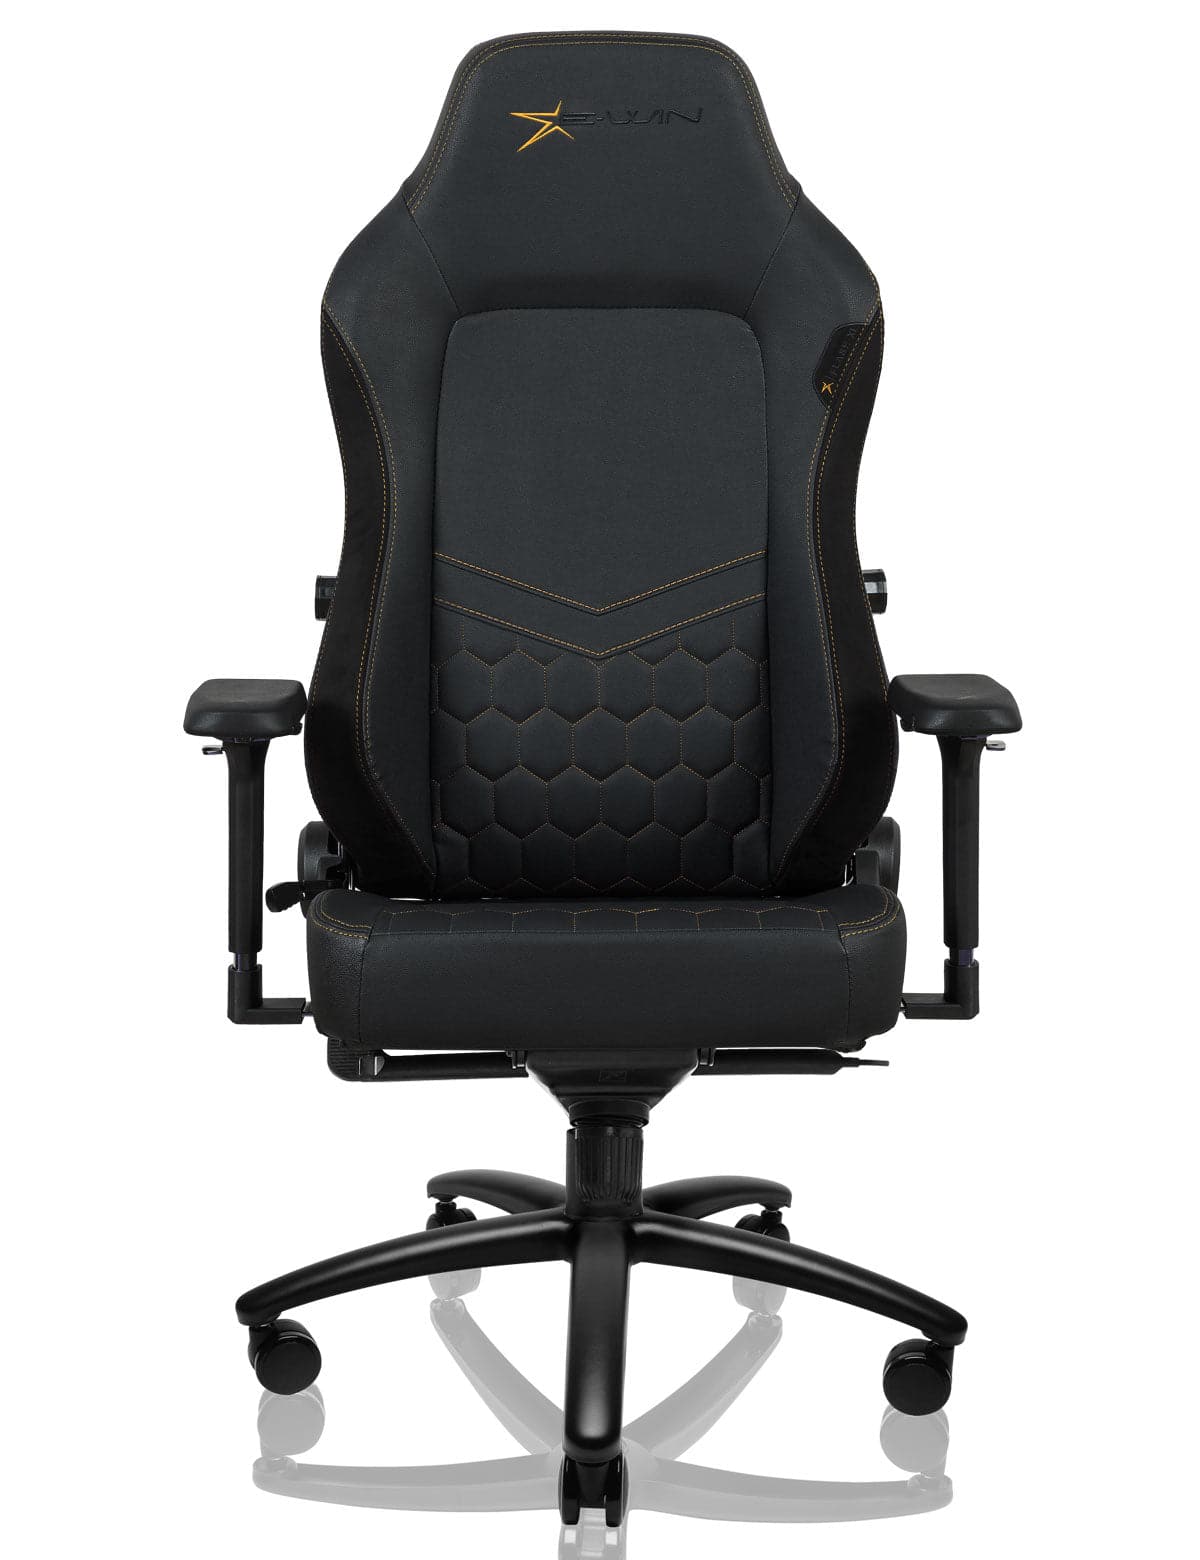 E-WIN Flash XL Size Upgraded Series Ergonomic Computer Gaming Office Chair with Pillows-FLF-XL-REV